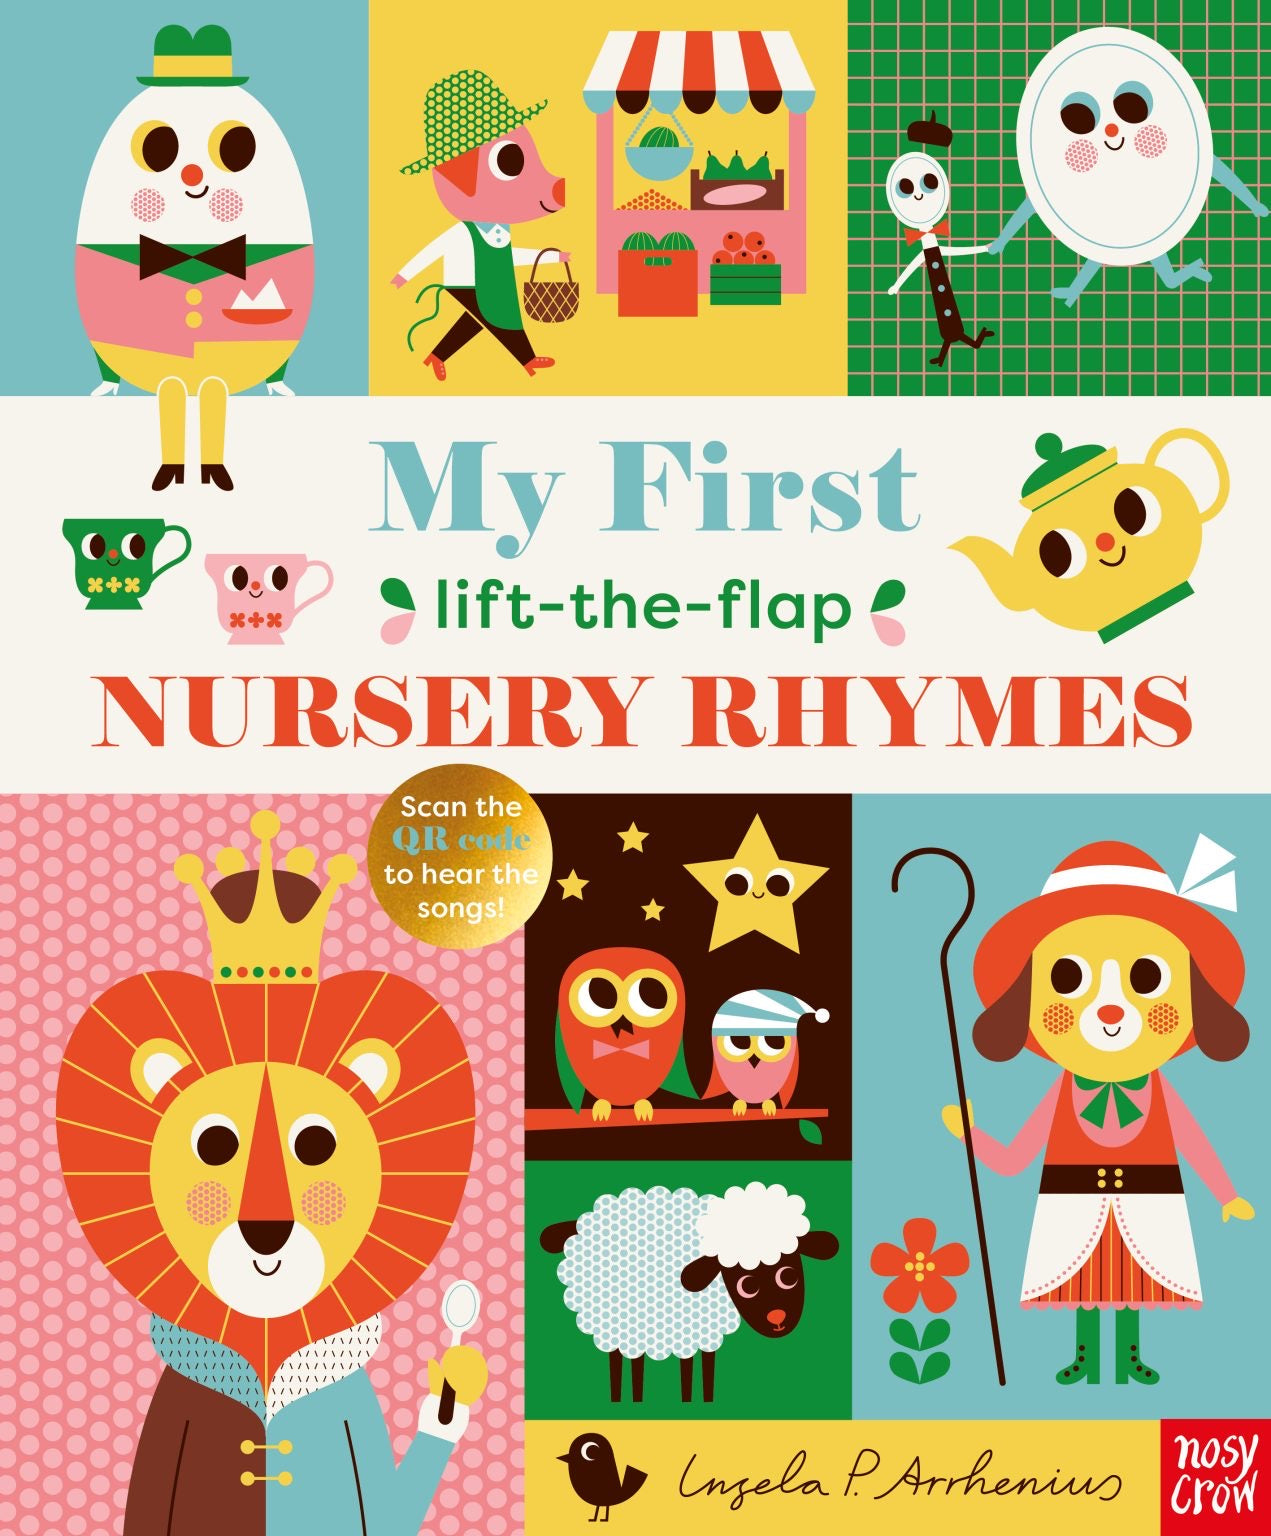 “My First Lift-The-Flap Nursery Rhymes” Book